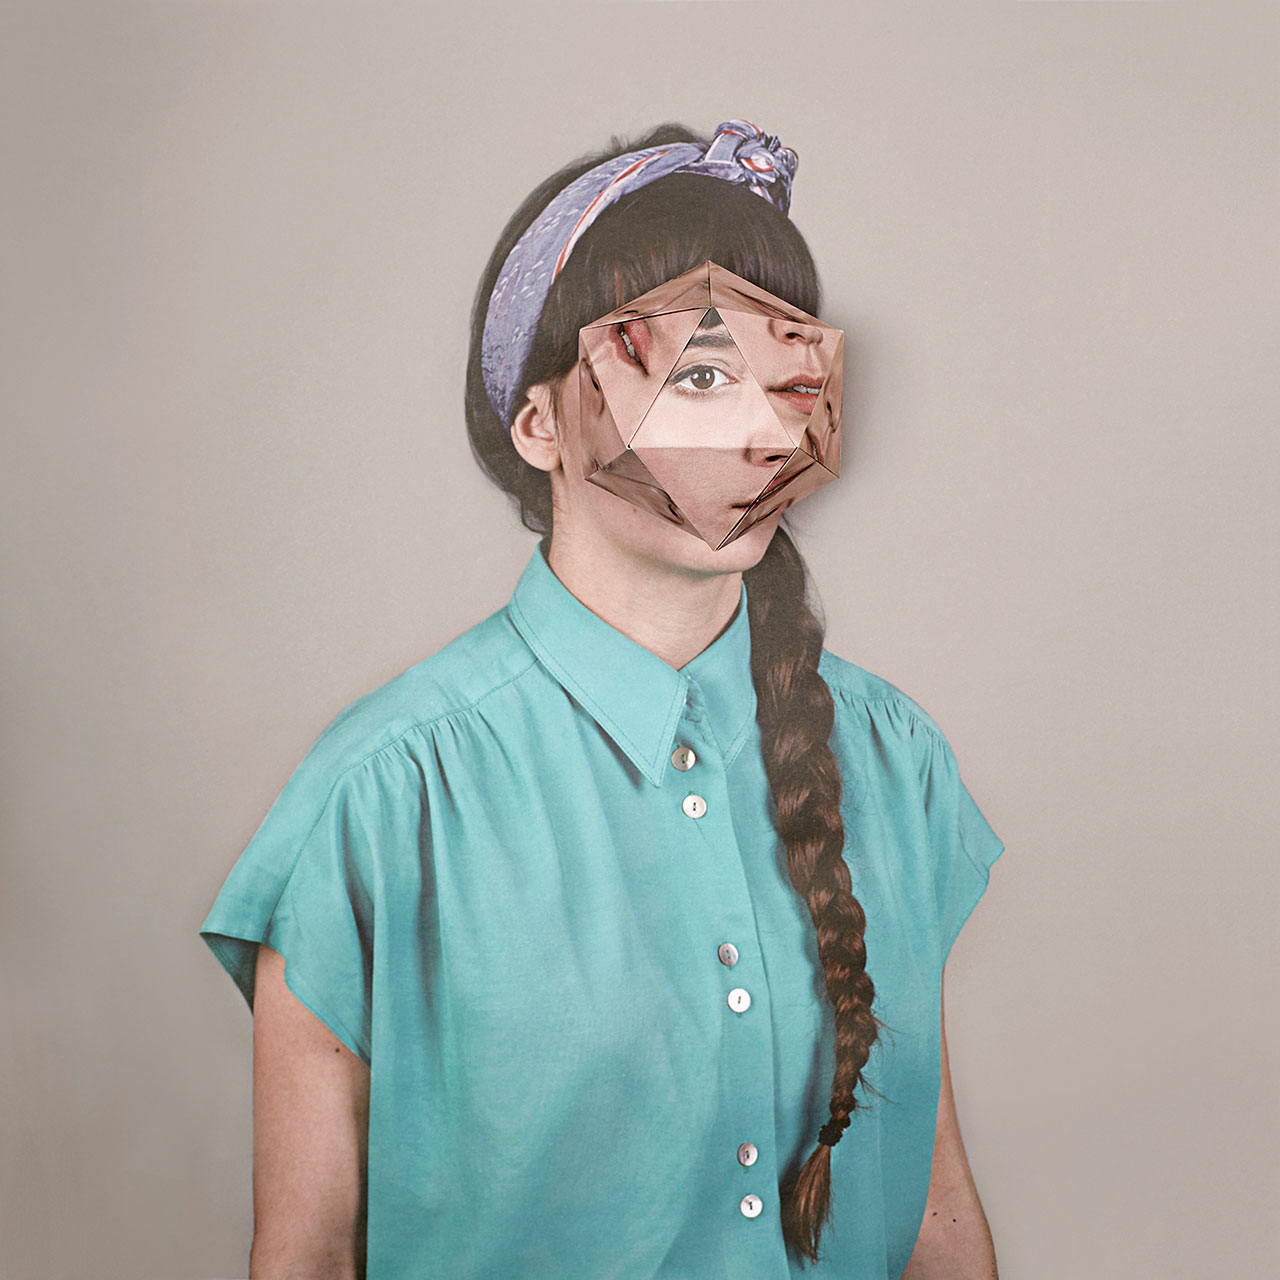 Alma Haser, Patient 27 from Cosmic Surgery series © Alma Haser.